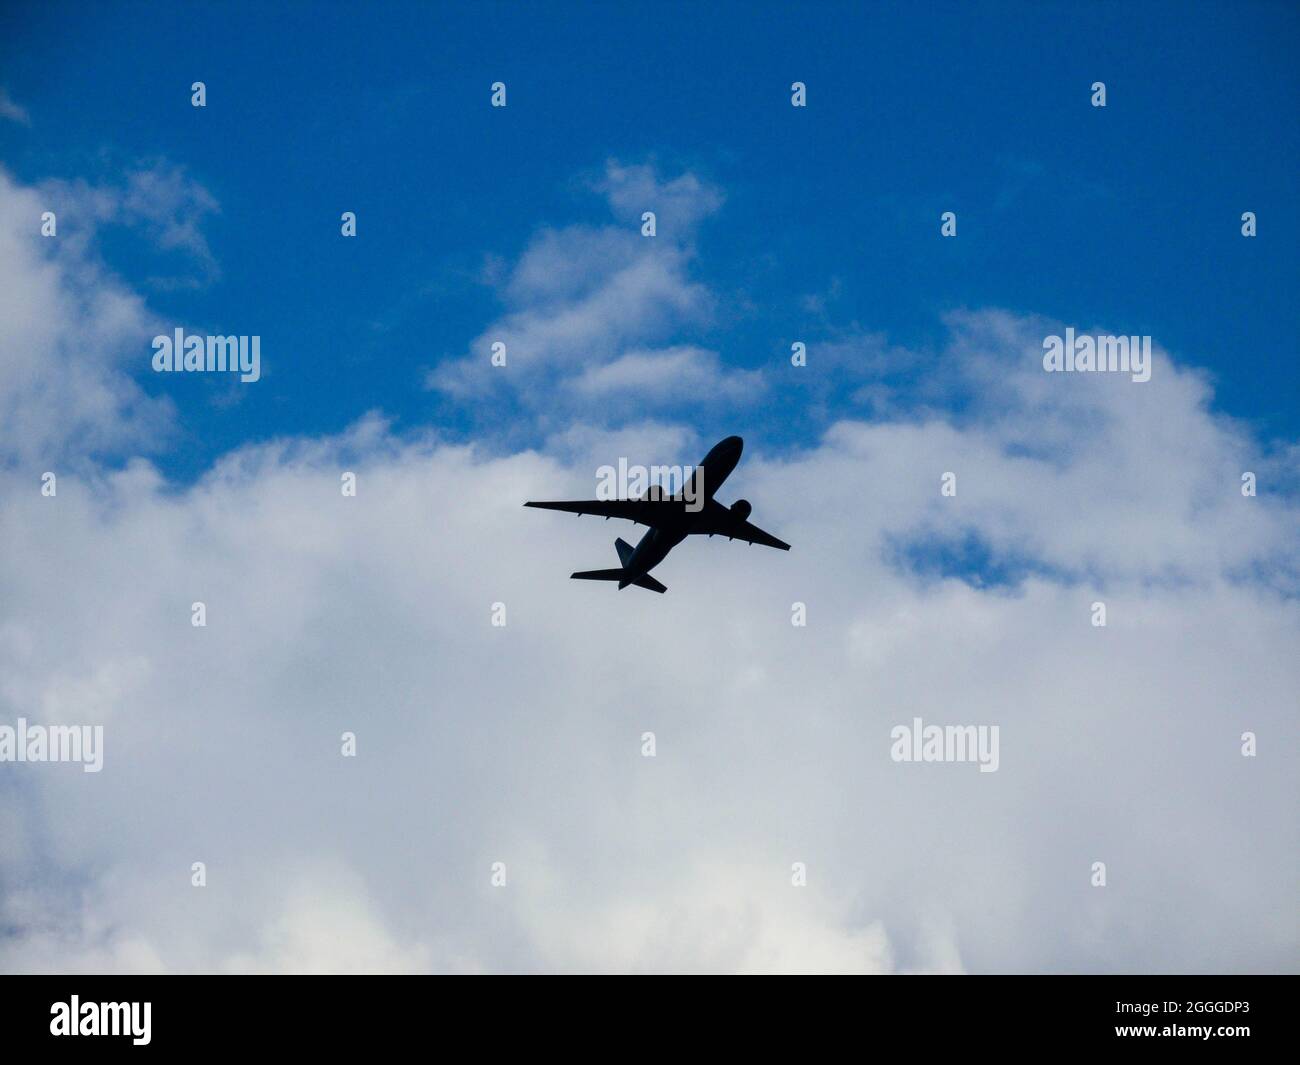 Silhouette of airplane flying in blue sky with white clouds in Vietnam Stock Photo